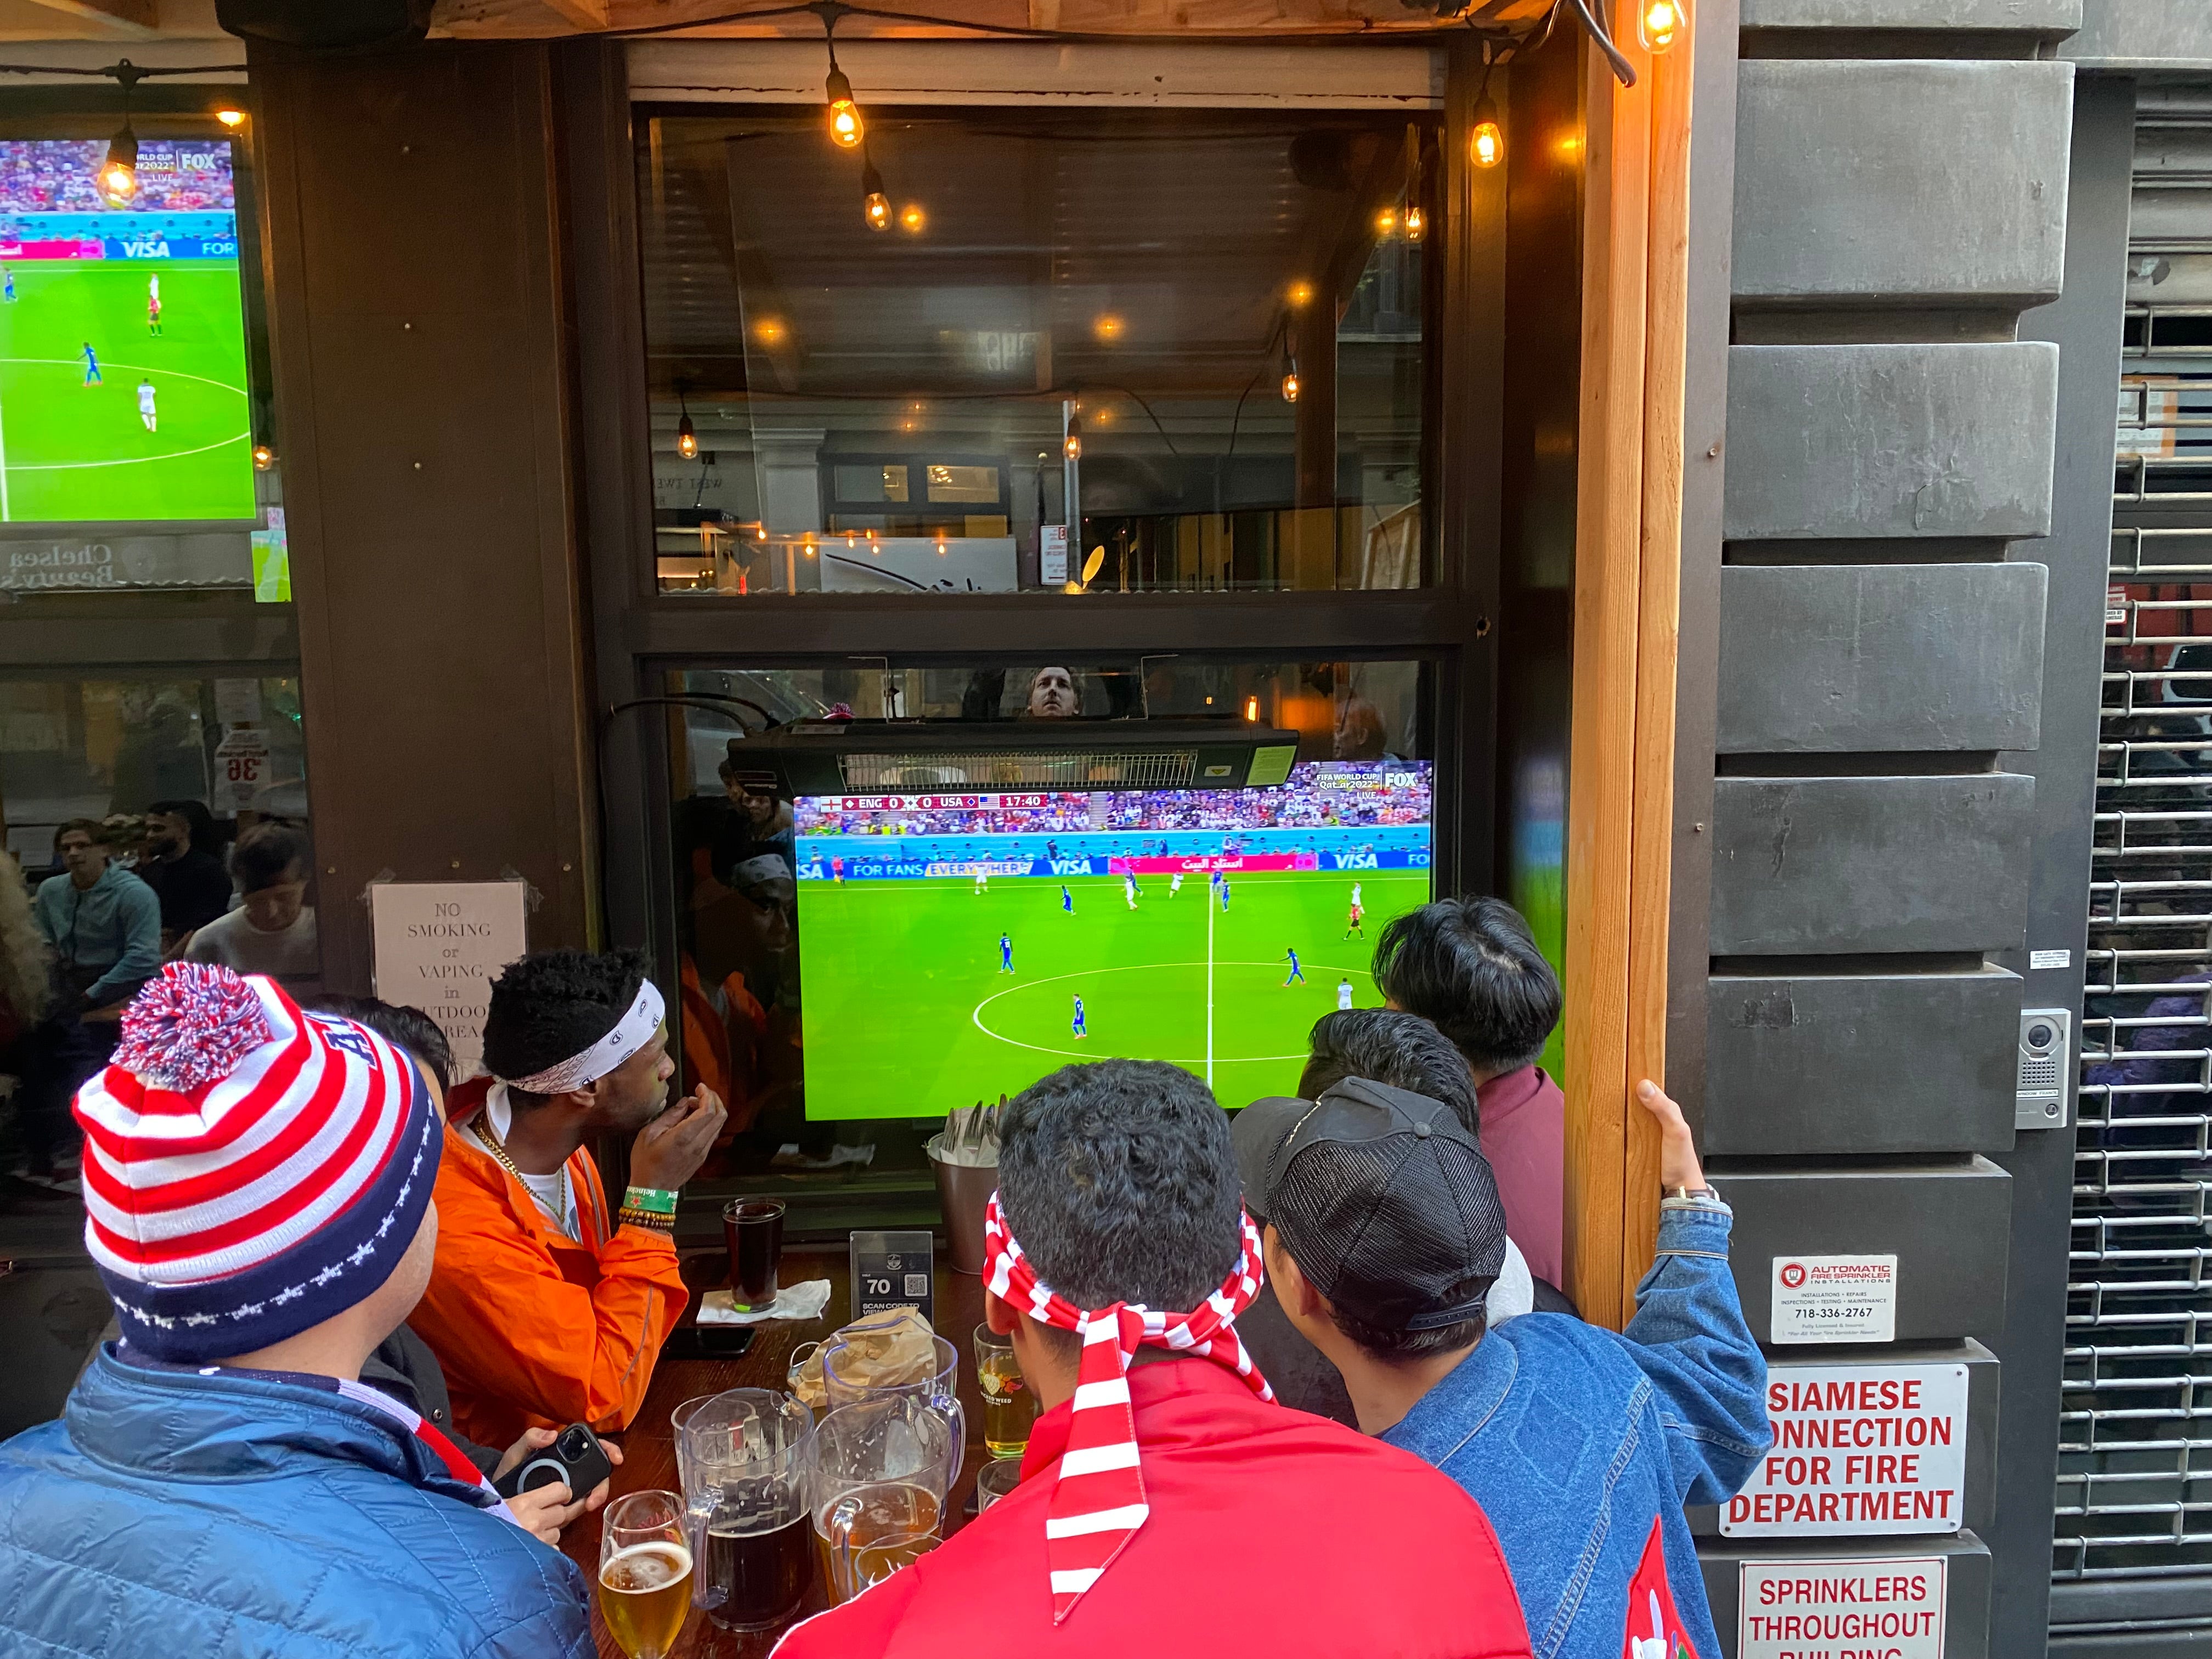 Football fans watch England vs USA at a New York bar in the group stage of the 2022 World Cup